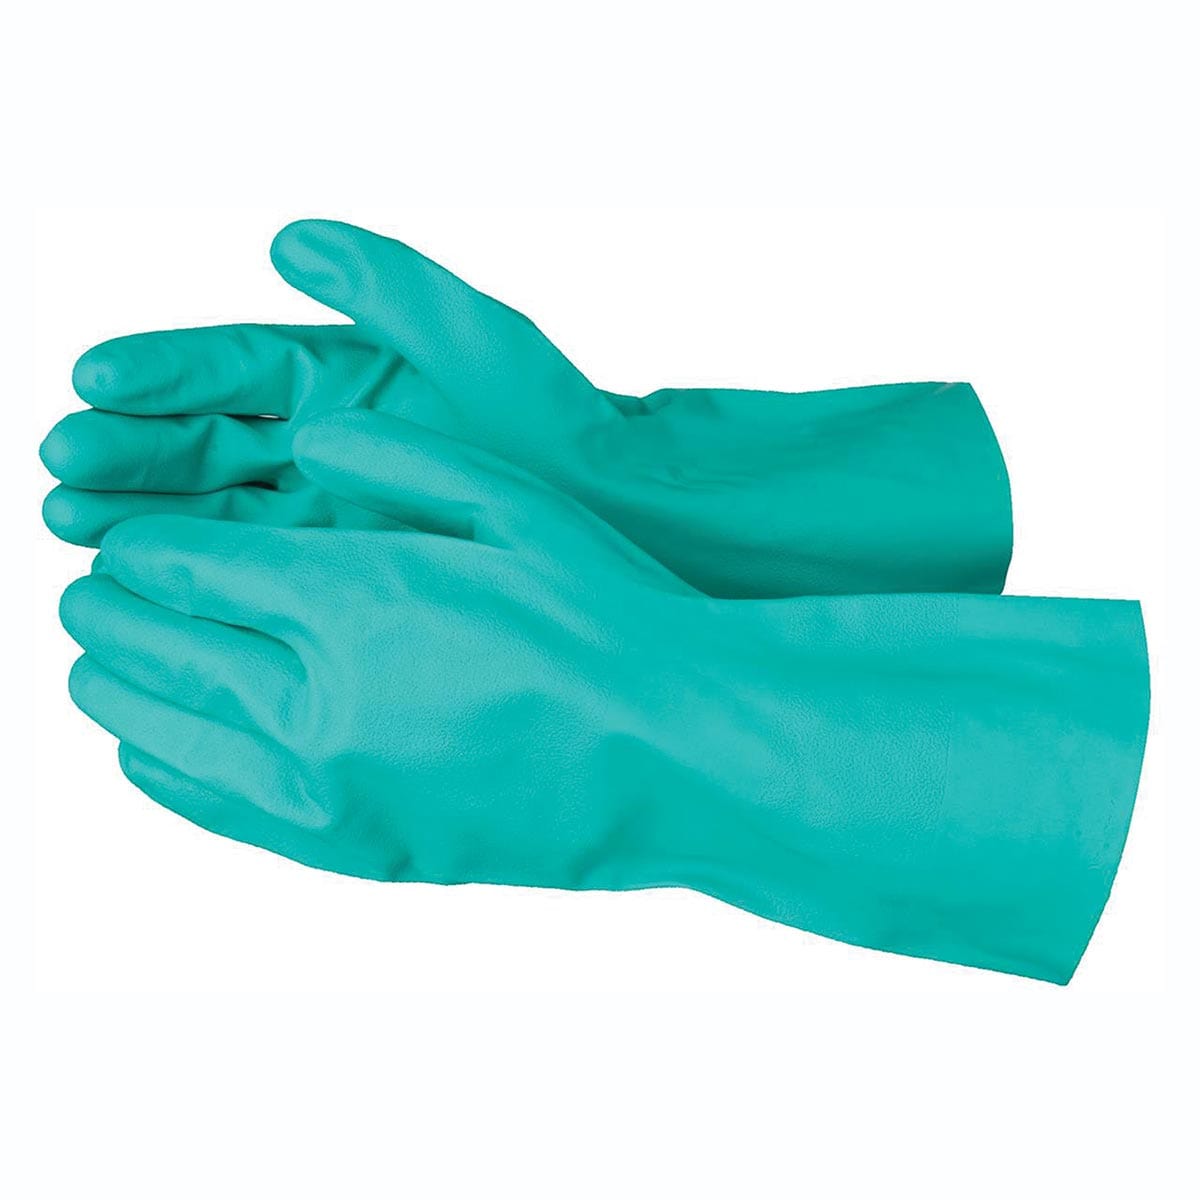 Gemplers Chemical Resistant 15-mil, Unlined, Nitrile Gloves, Box of 36 pair